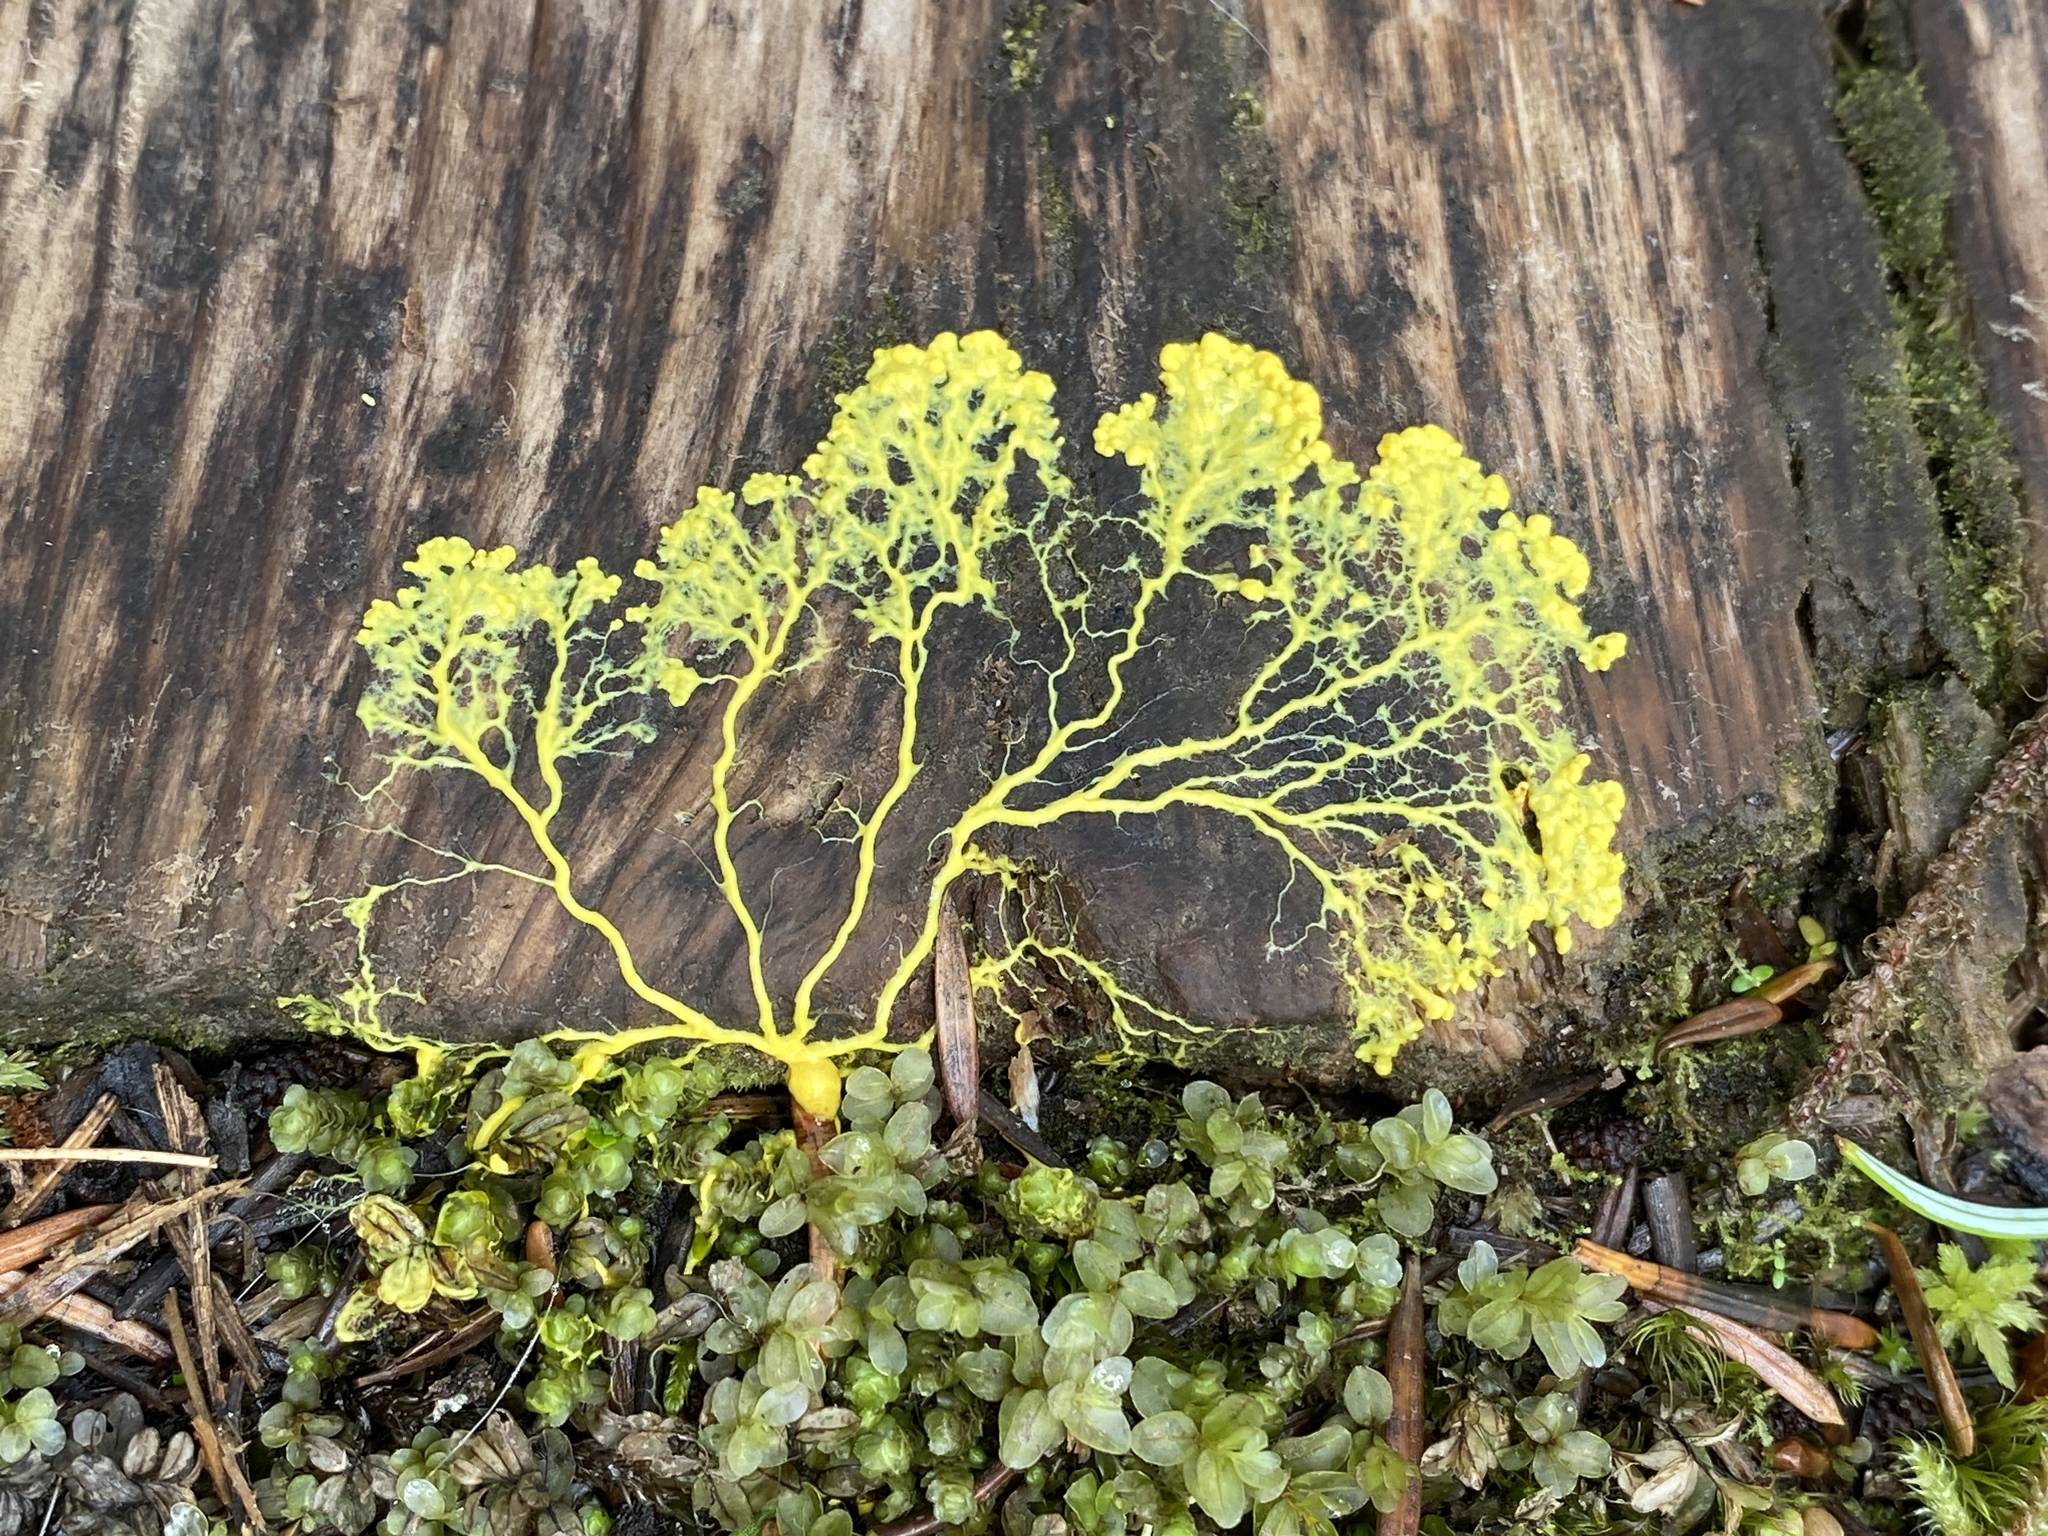 Slime mold grows at Point Bridget on June 27,2020. (Courtesy Photo | Deana Barajas)